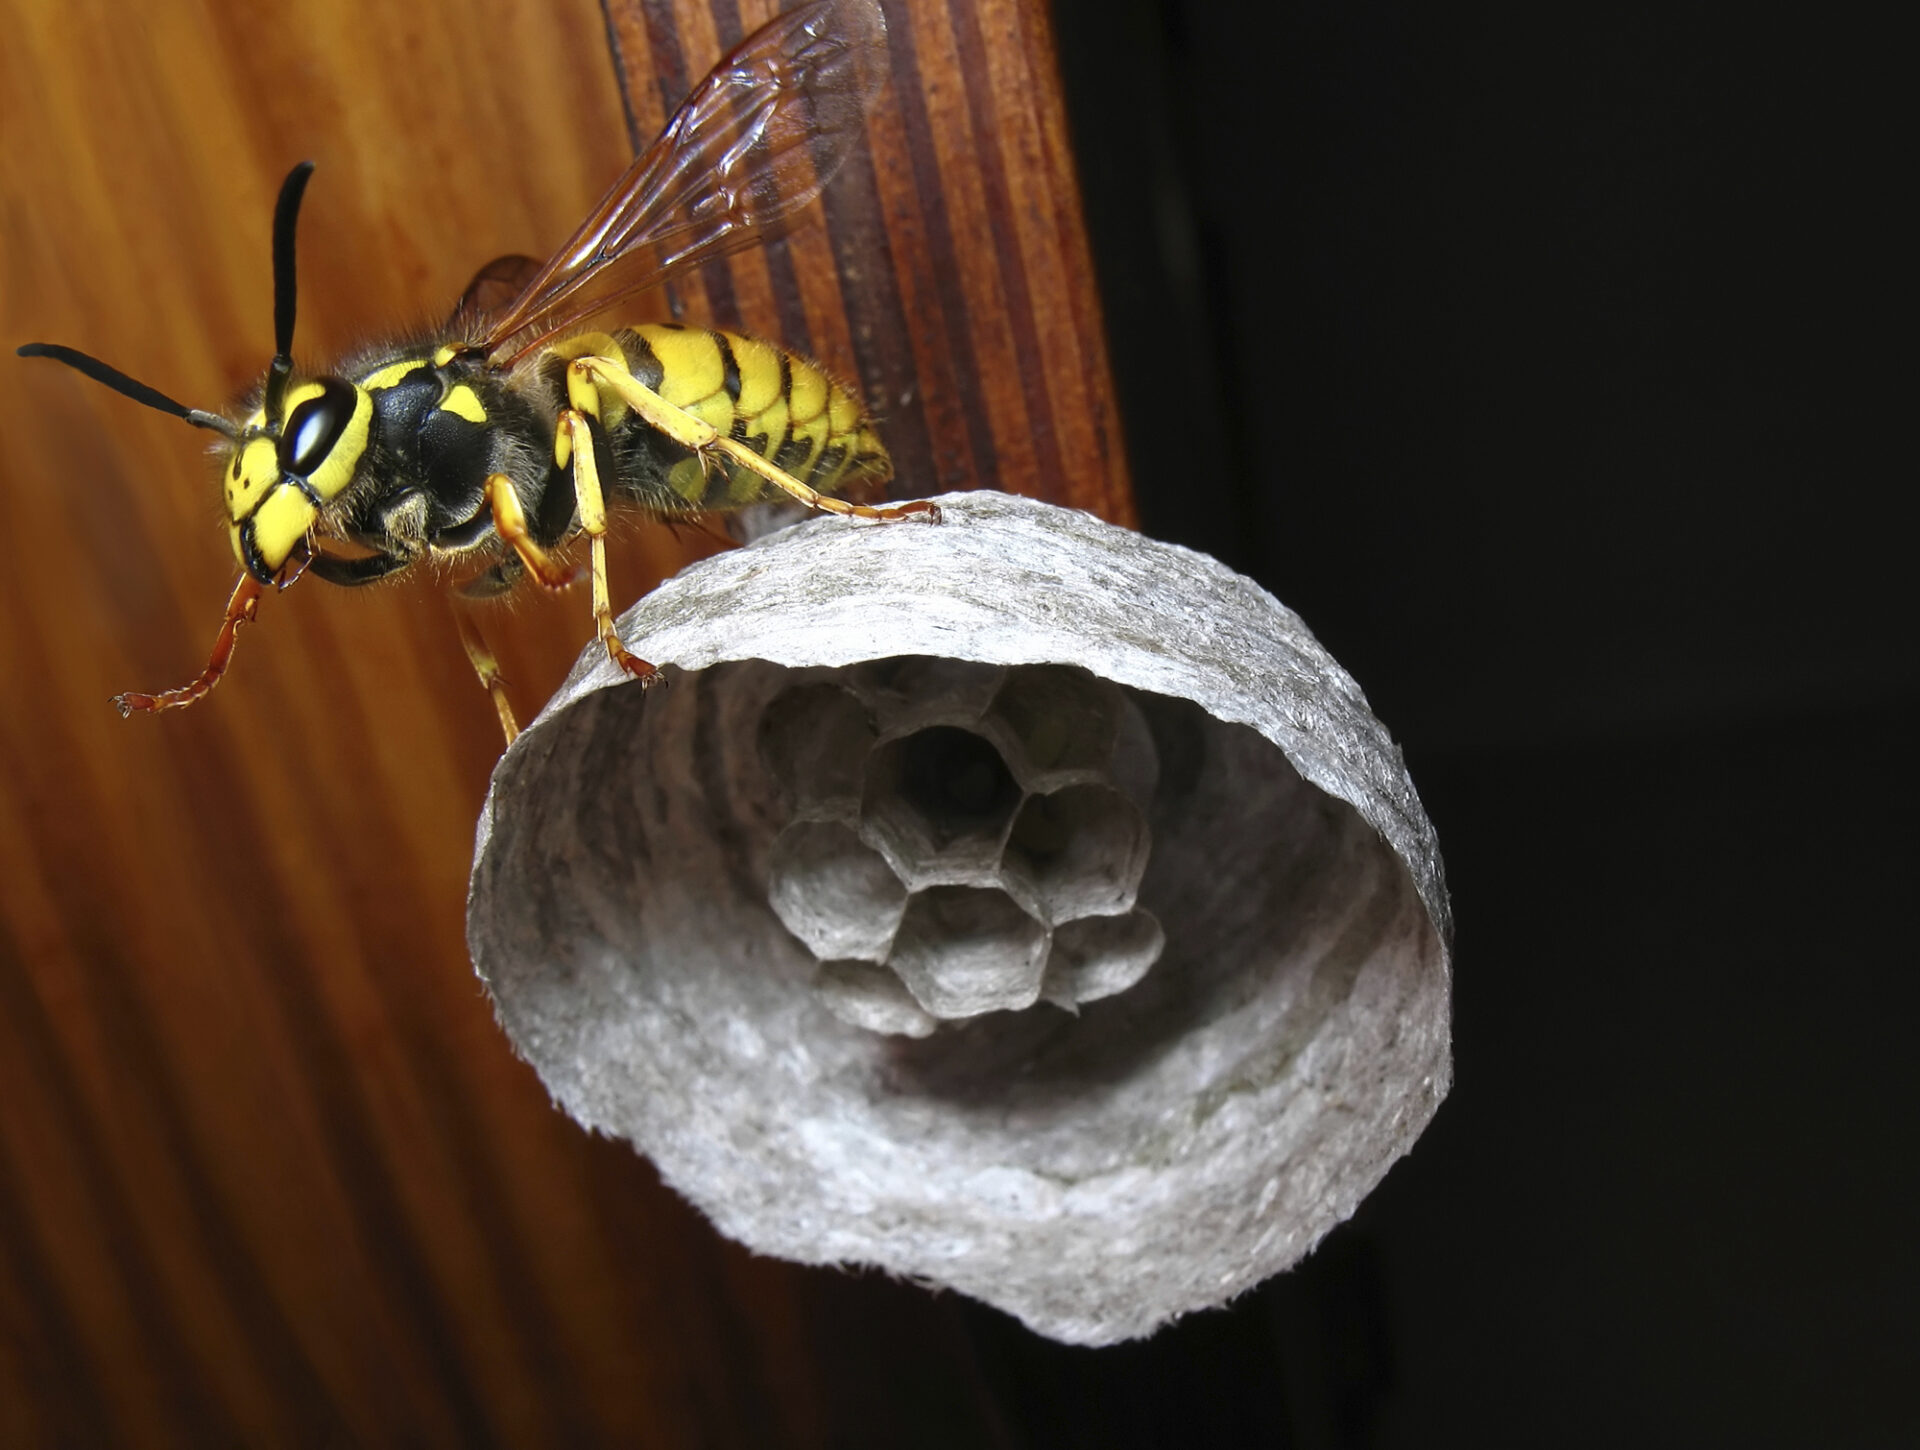 https://www.catseyepest.com/wp-content/uploads/2021/09/yellowjacket-nest-in-wall-of-house.jpg